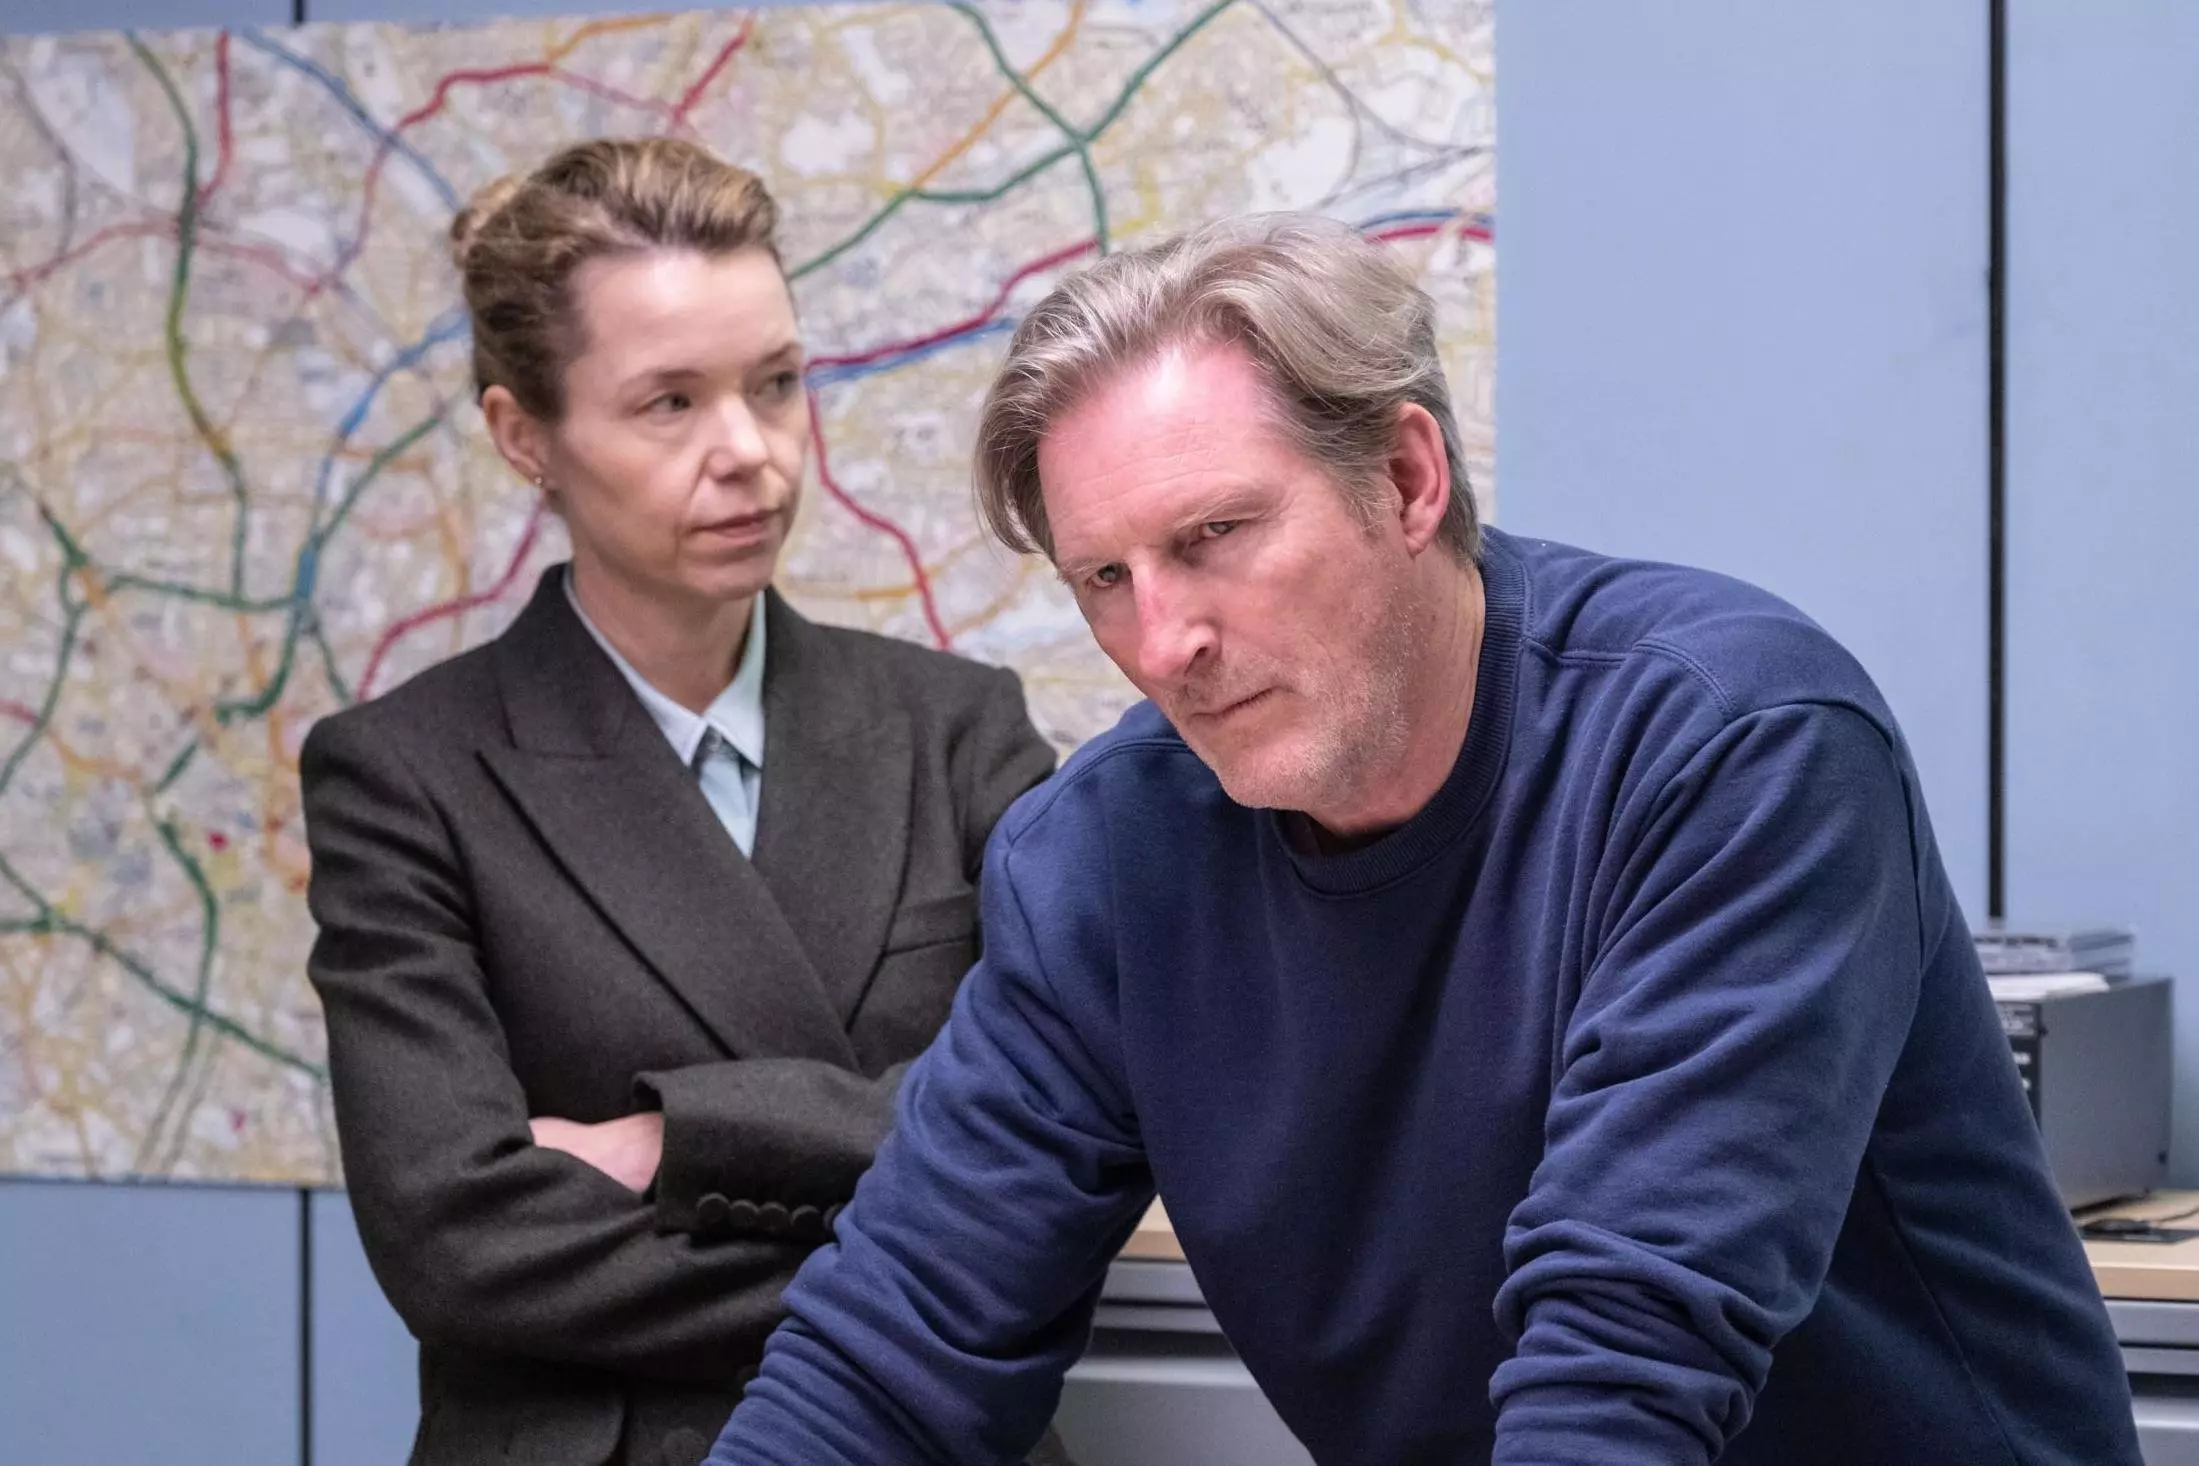 Line of Duty will be back in March 2021 (